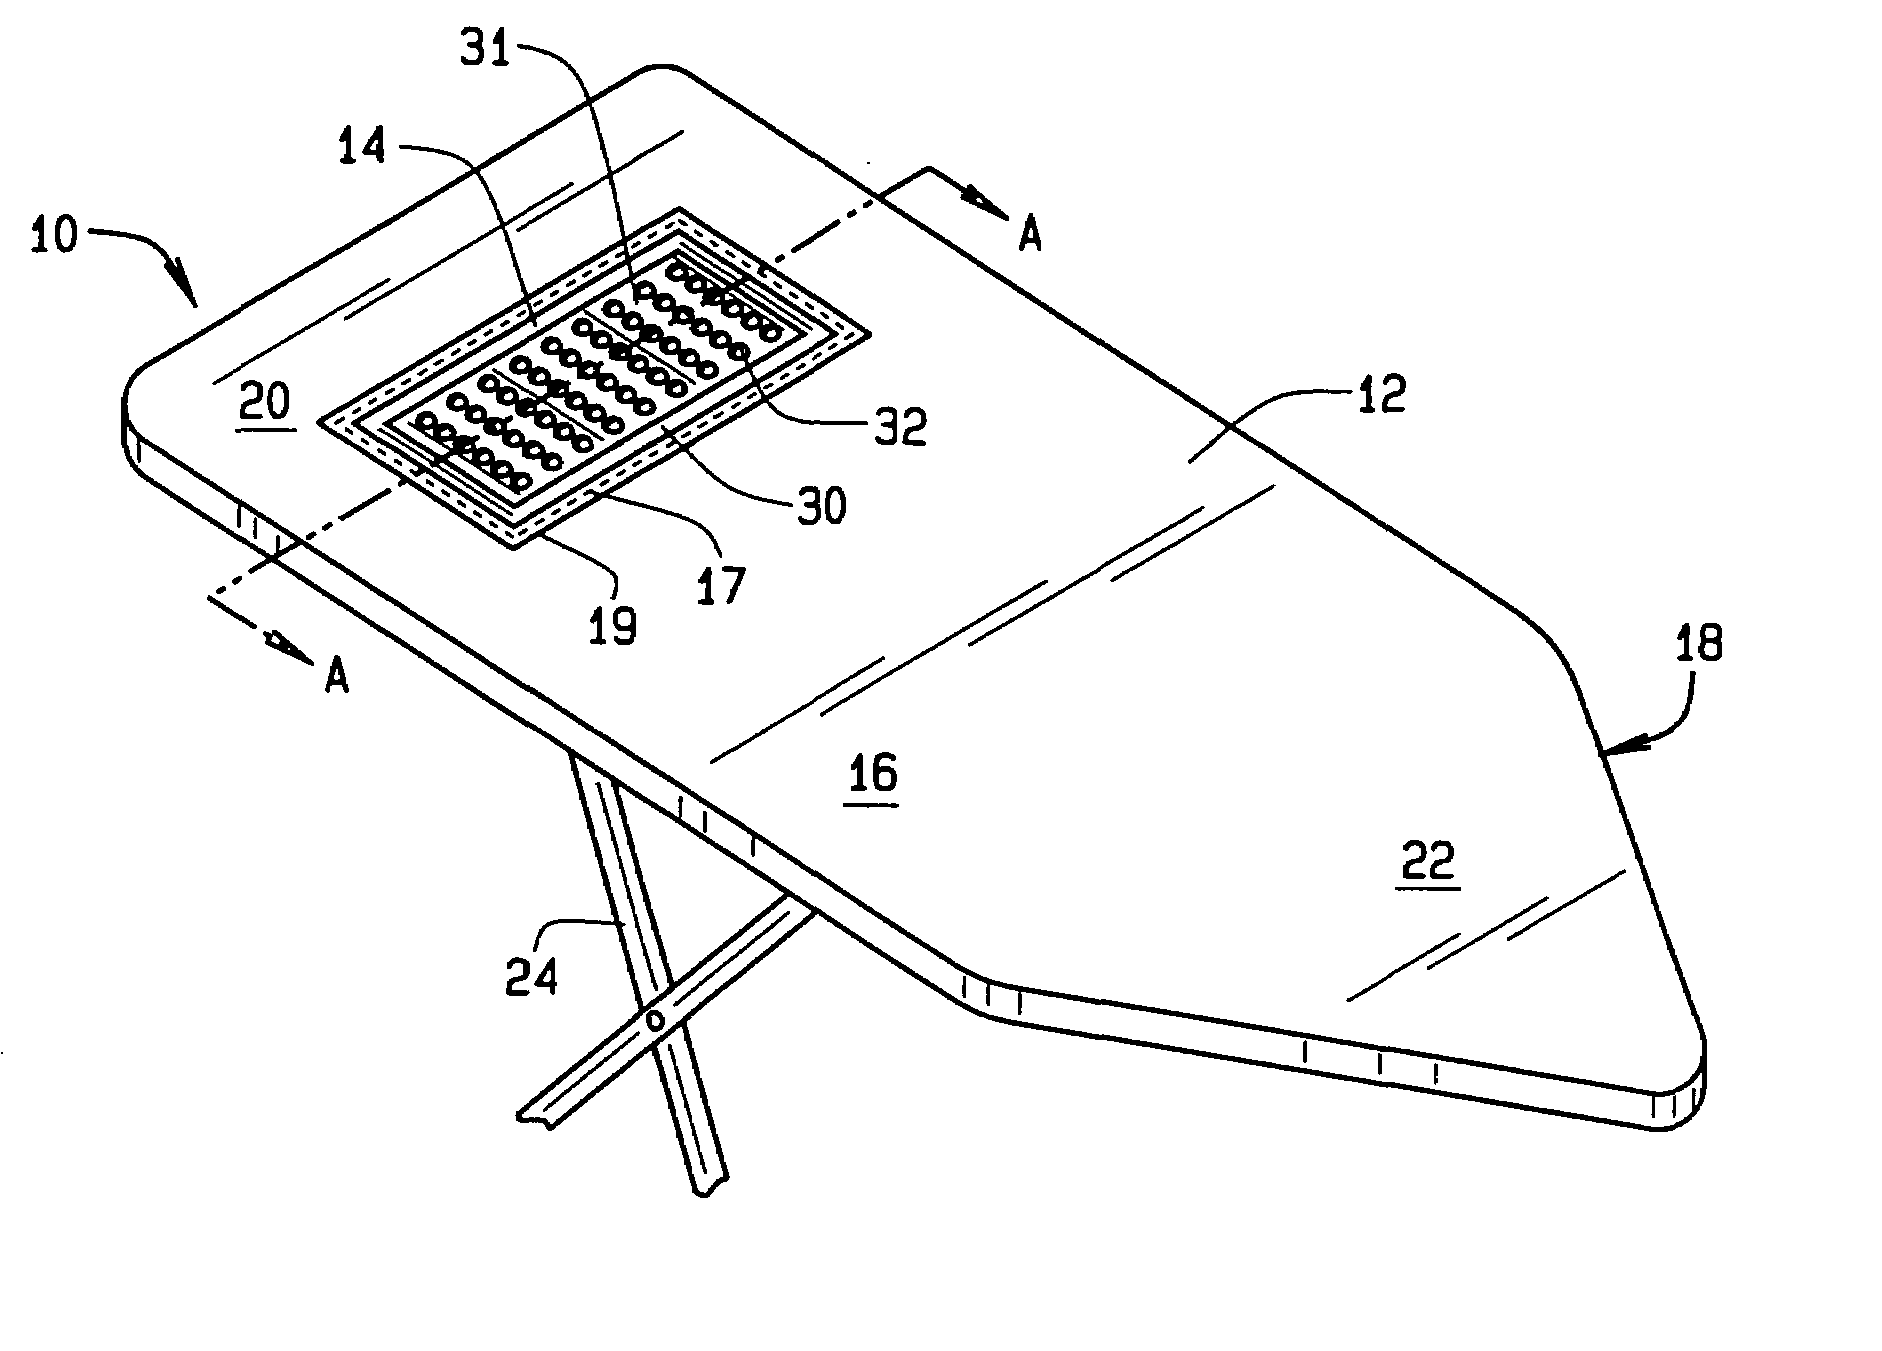 Ironing board cover with panel and methods of use